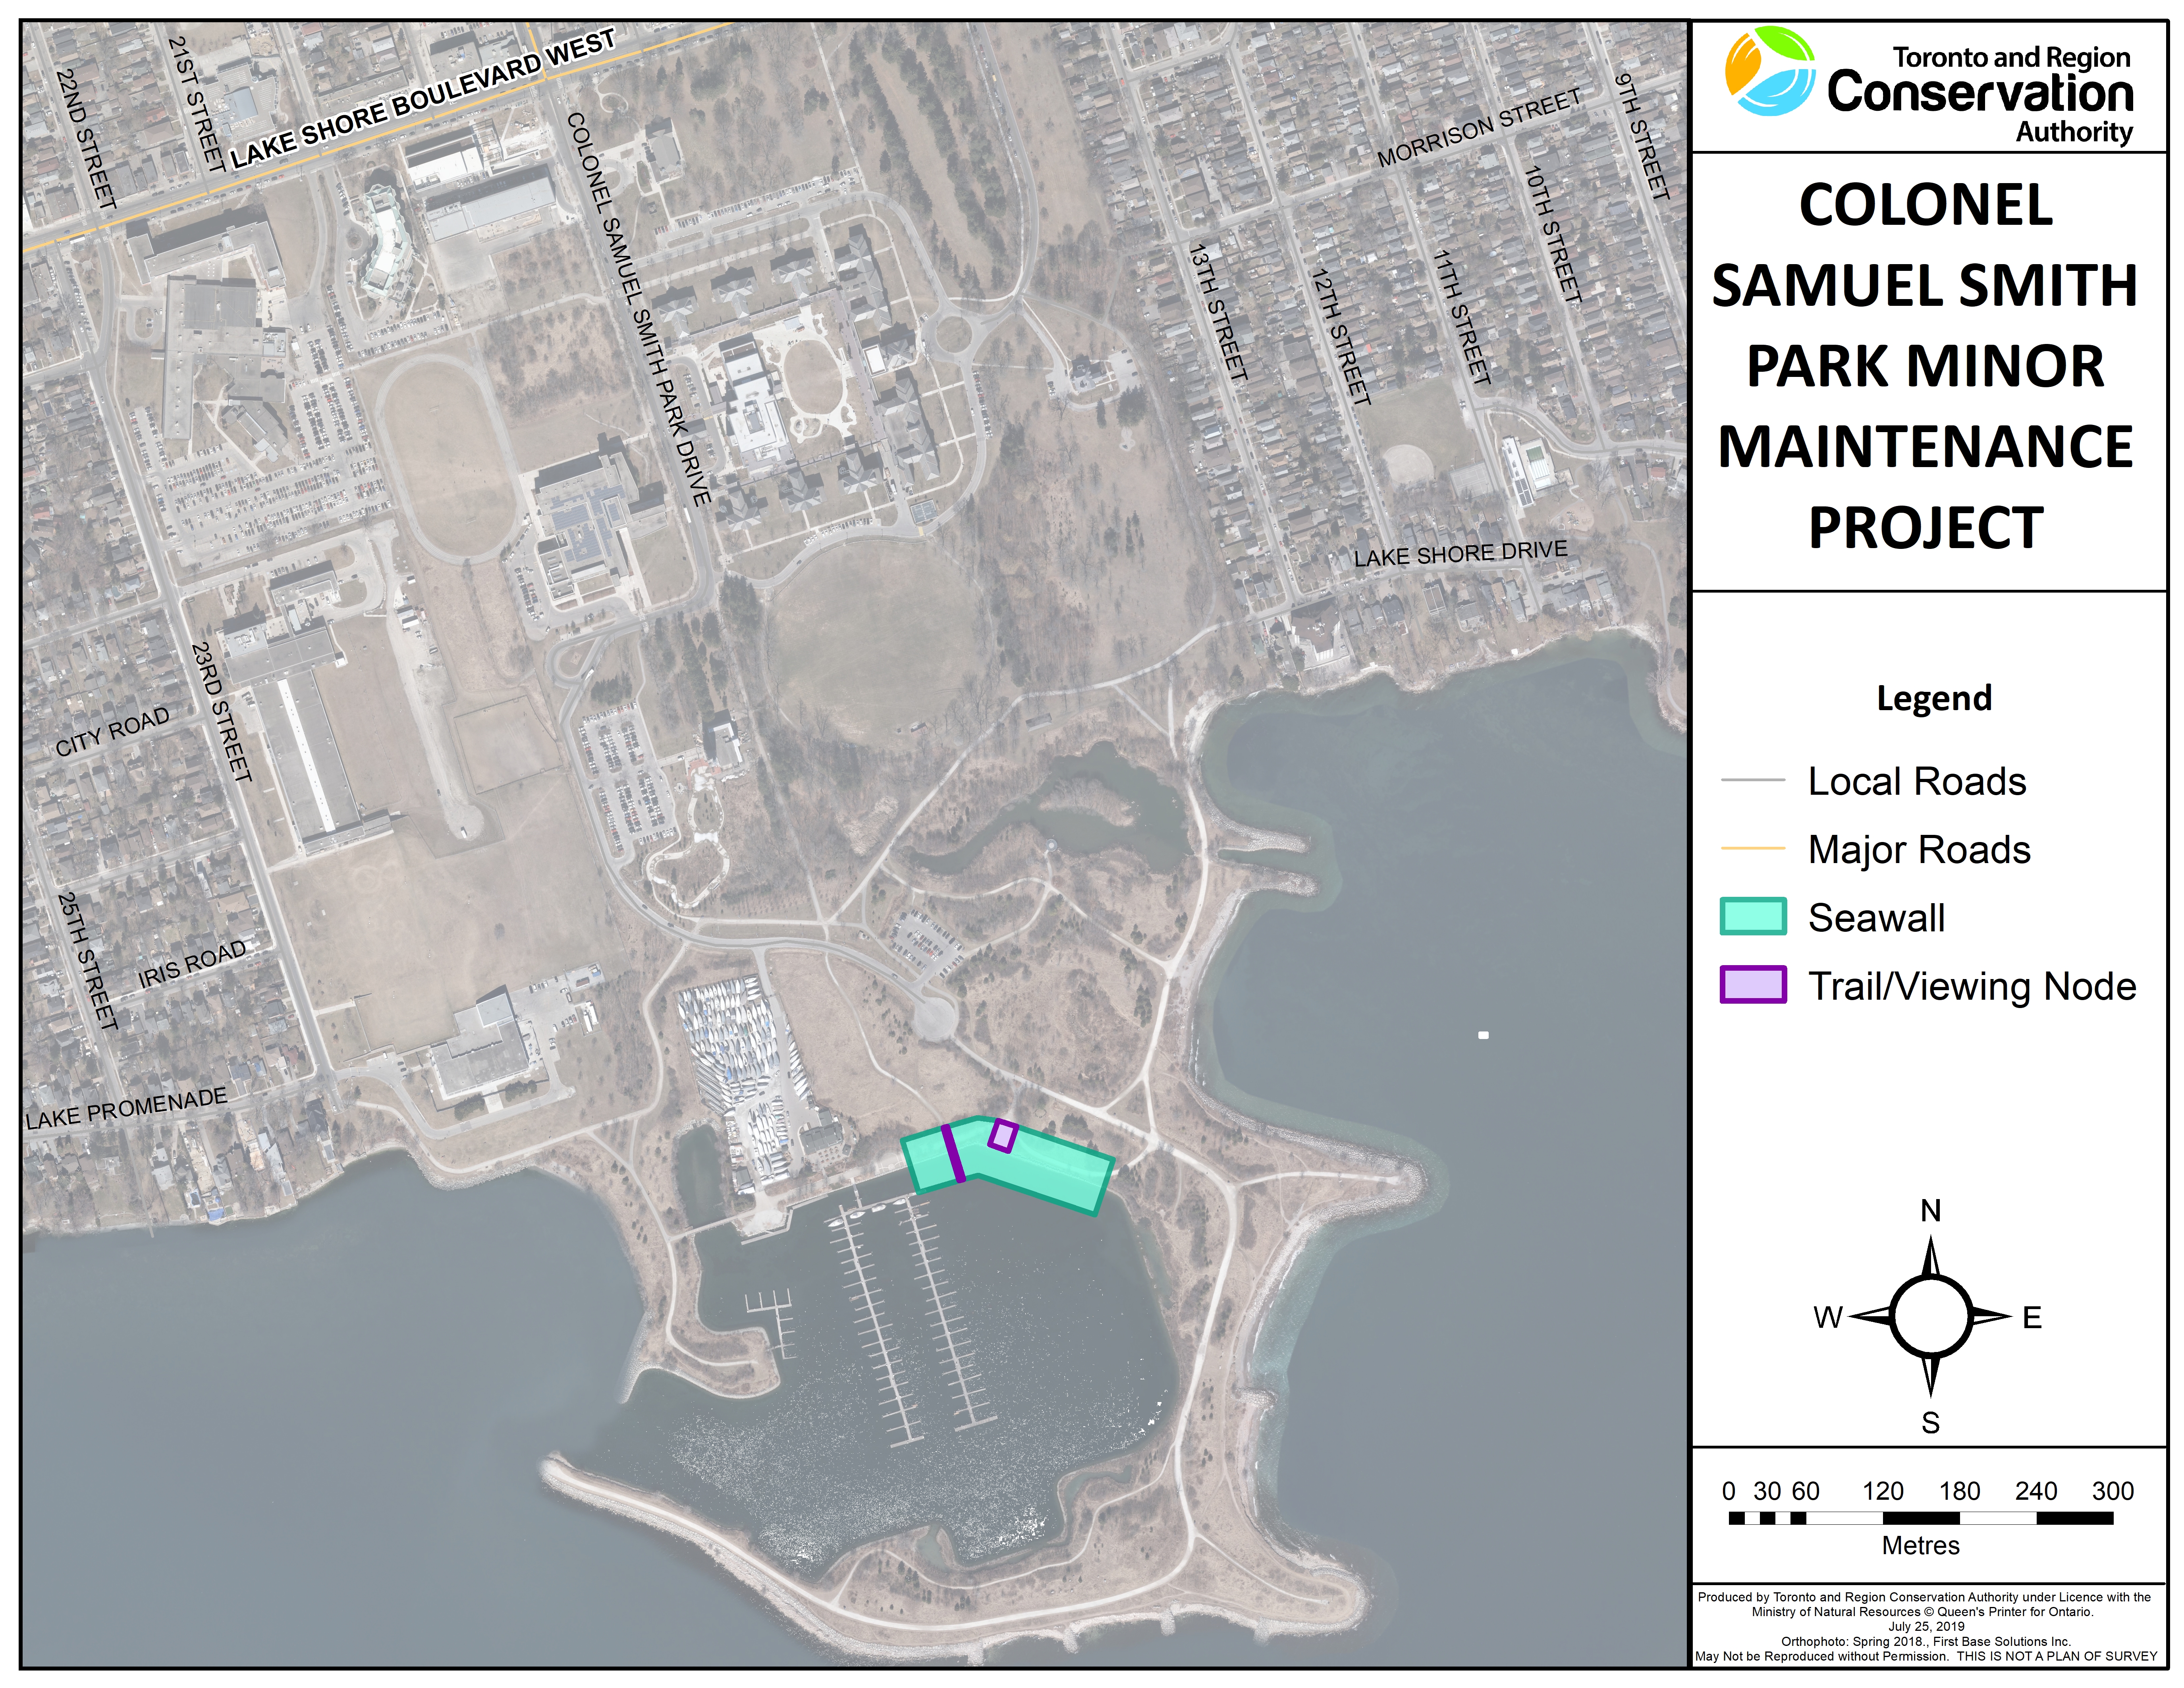 Project area including the location of the seawall at Colonel Samuel Smith Park. Source: TRCA, 2019.